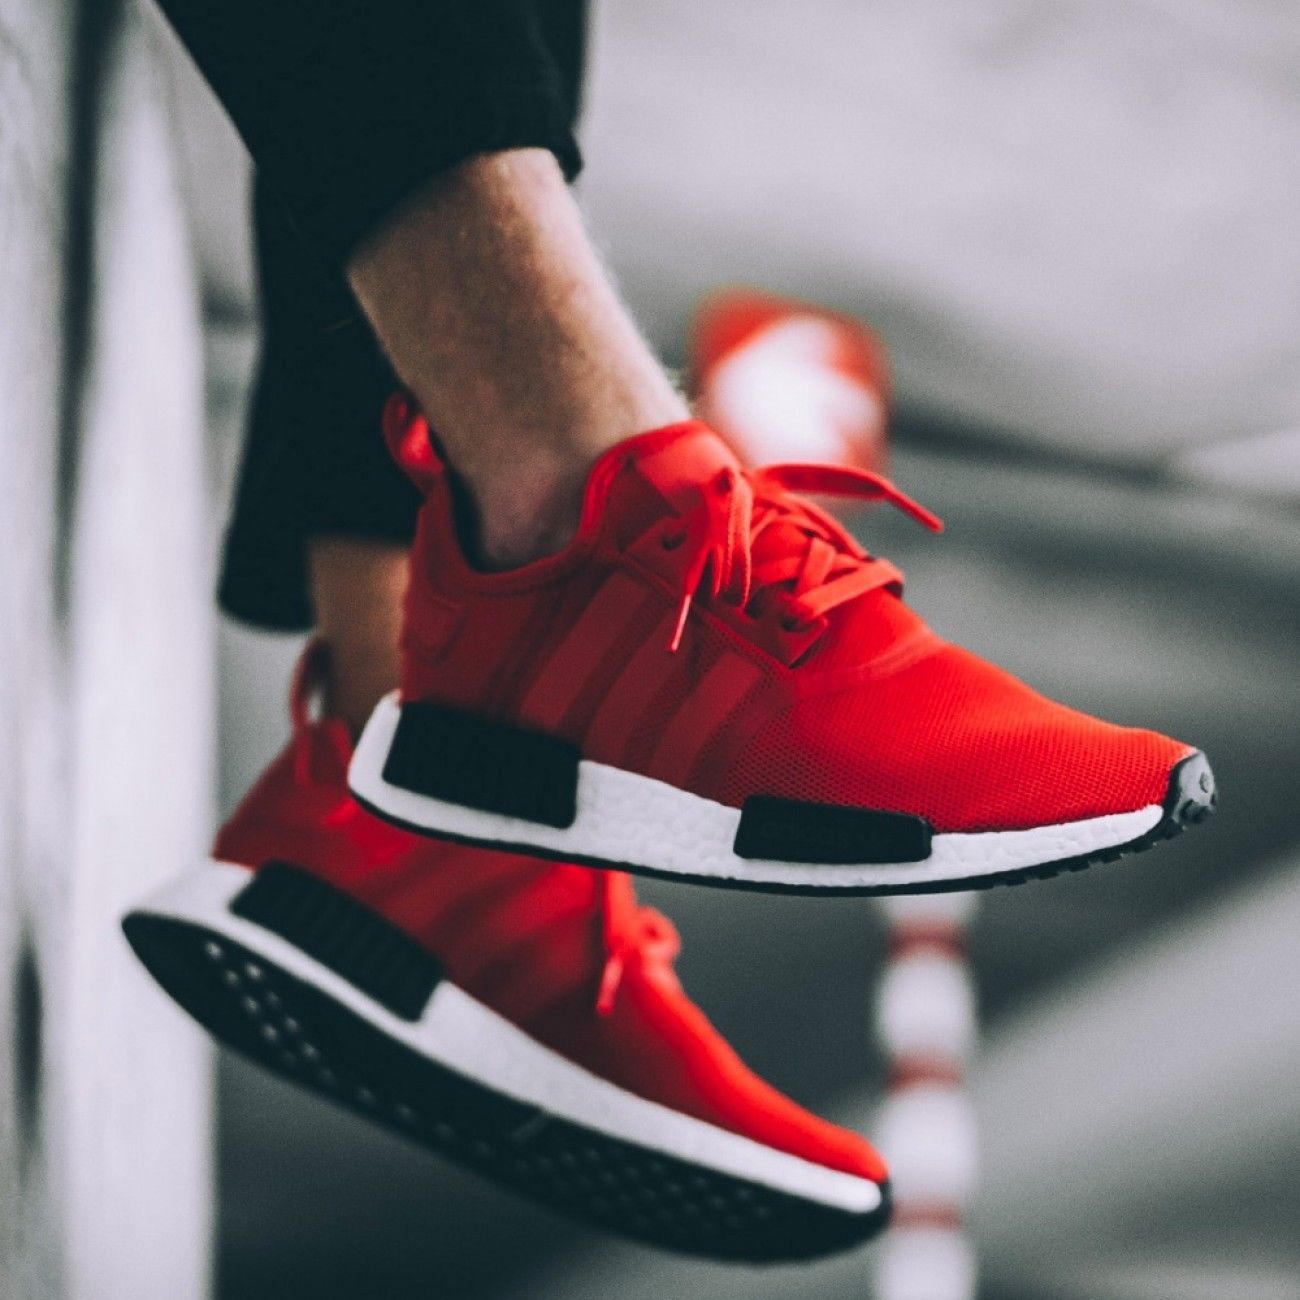 adidas nmd r1 clear red